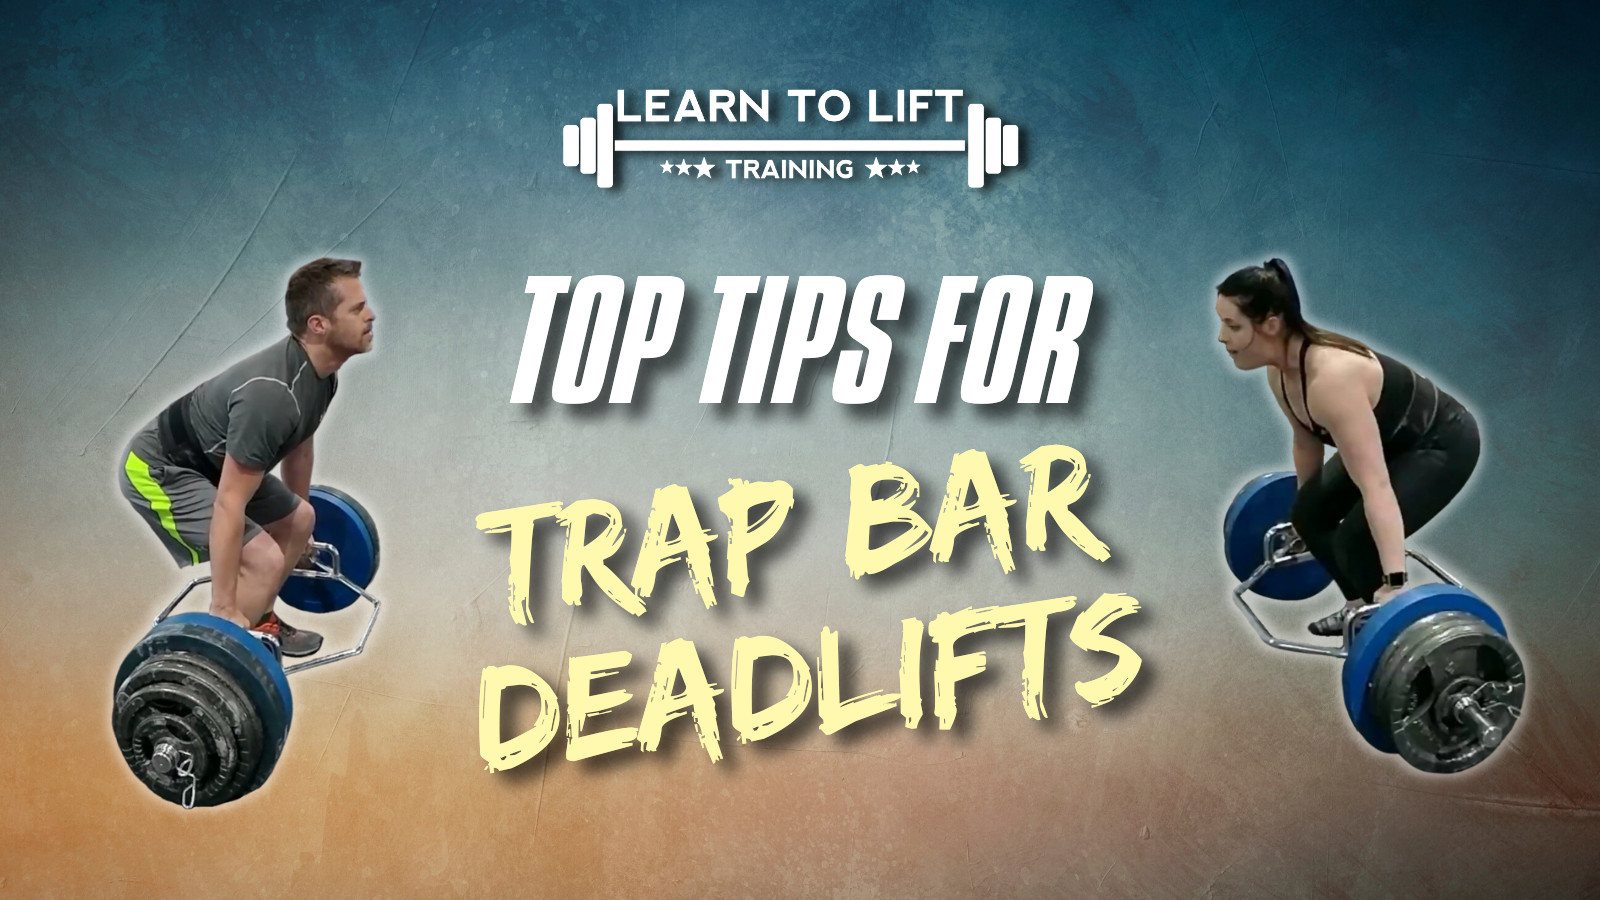 Glasgow Bootcamp - 3 Things You Can Do To Improve Your Trap Bar Deadlifts